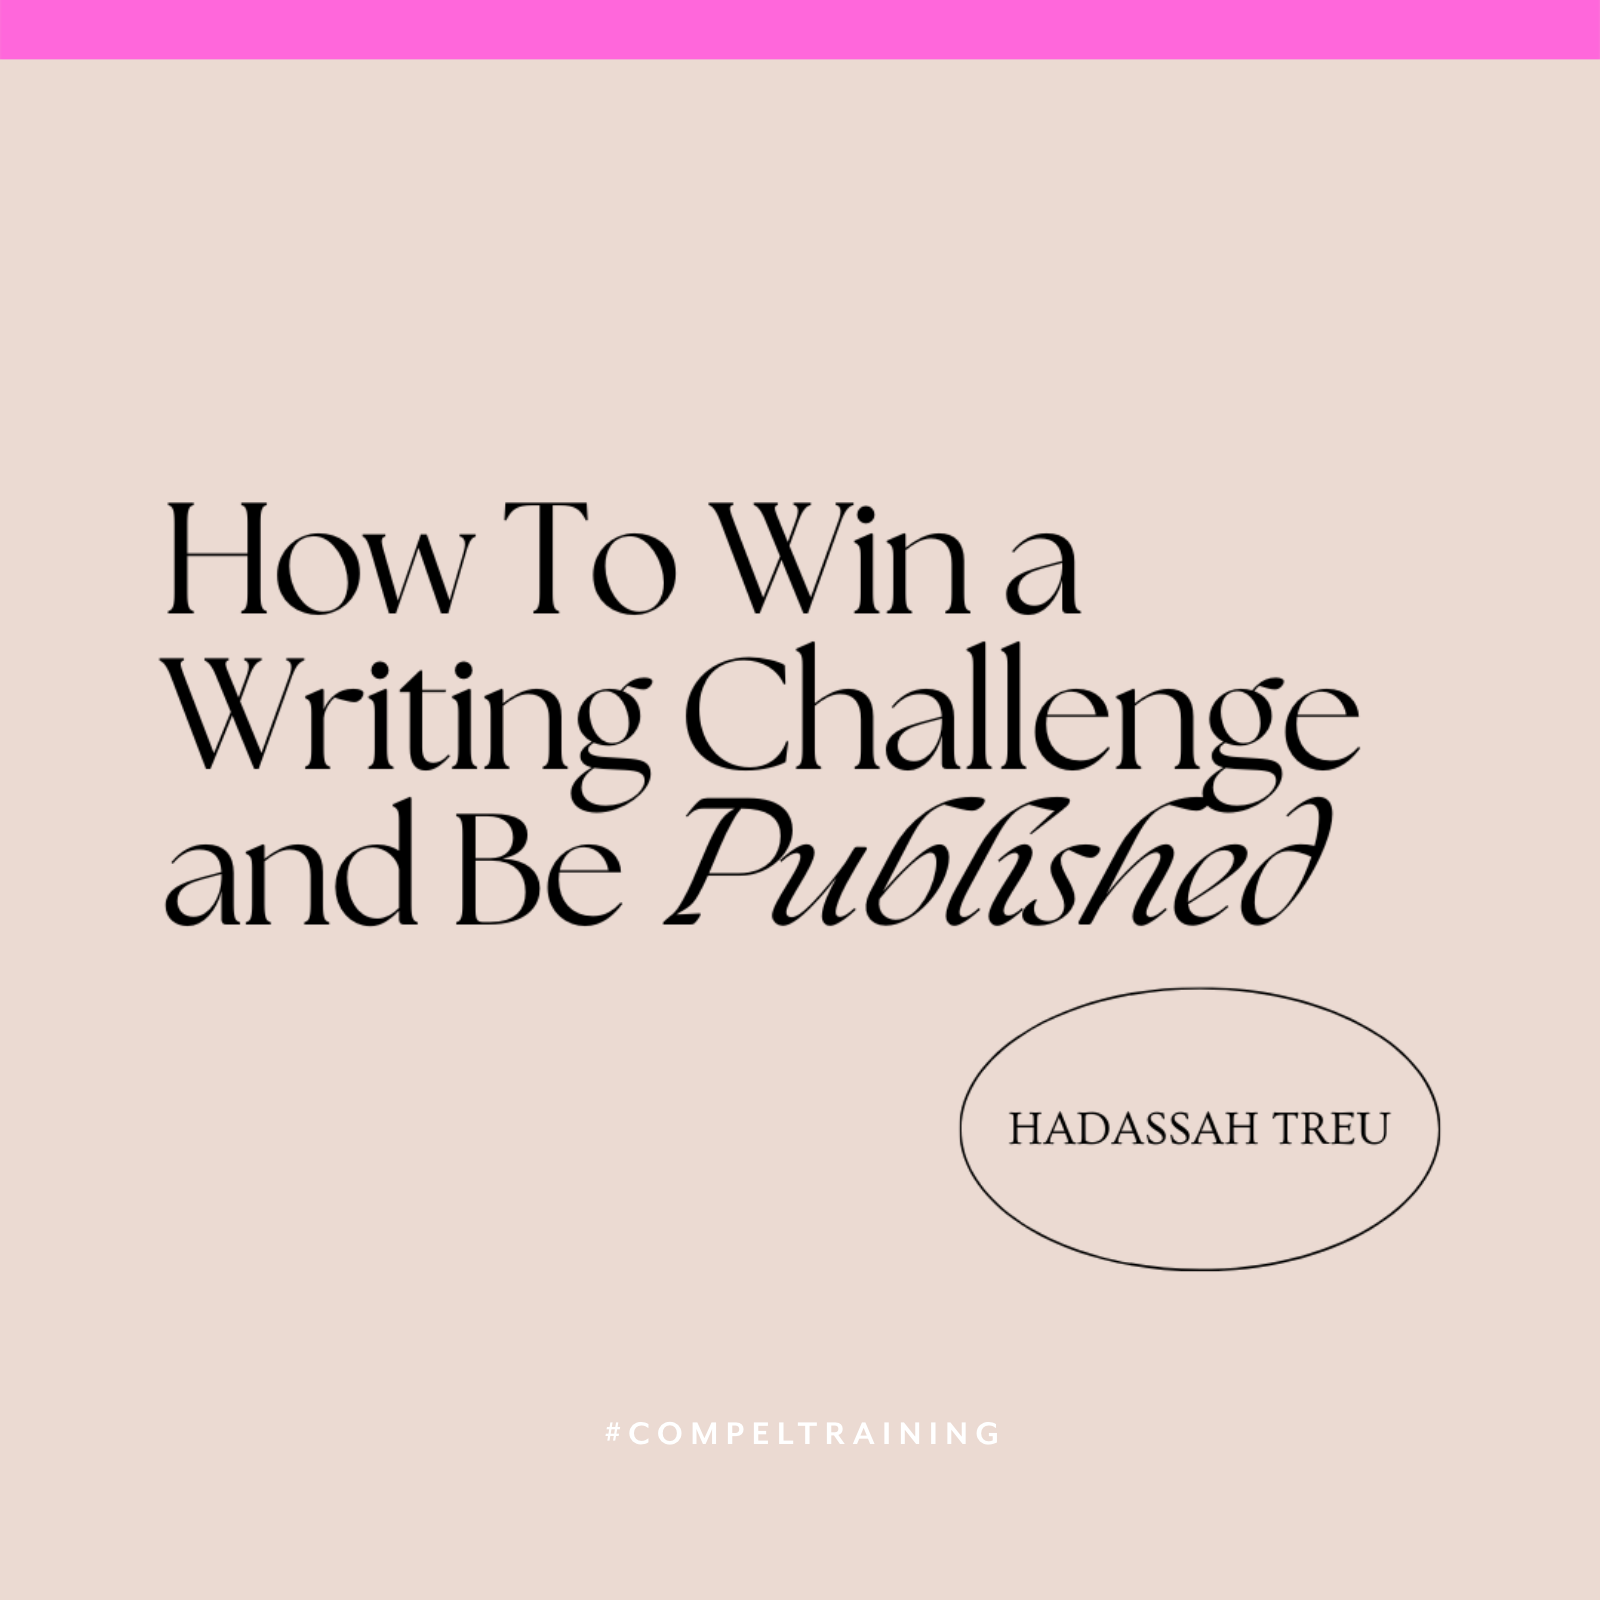 How To Win a Writing Challenge and Be Published